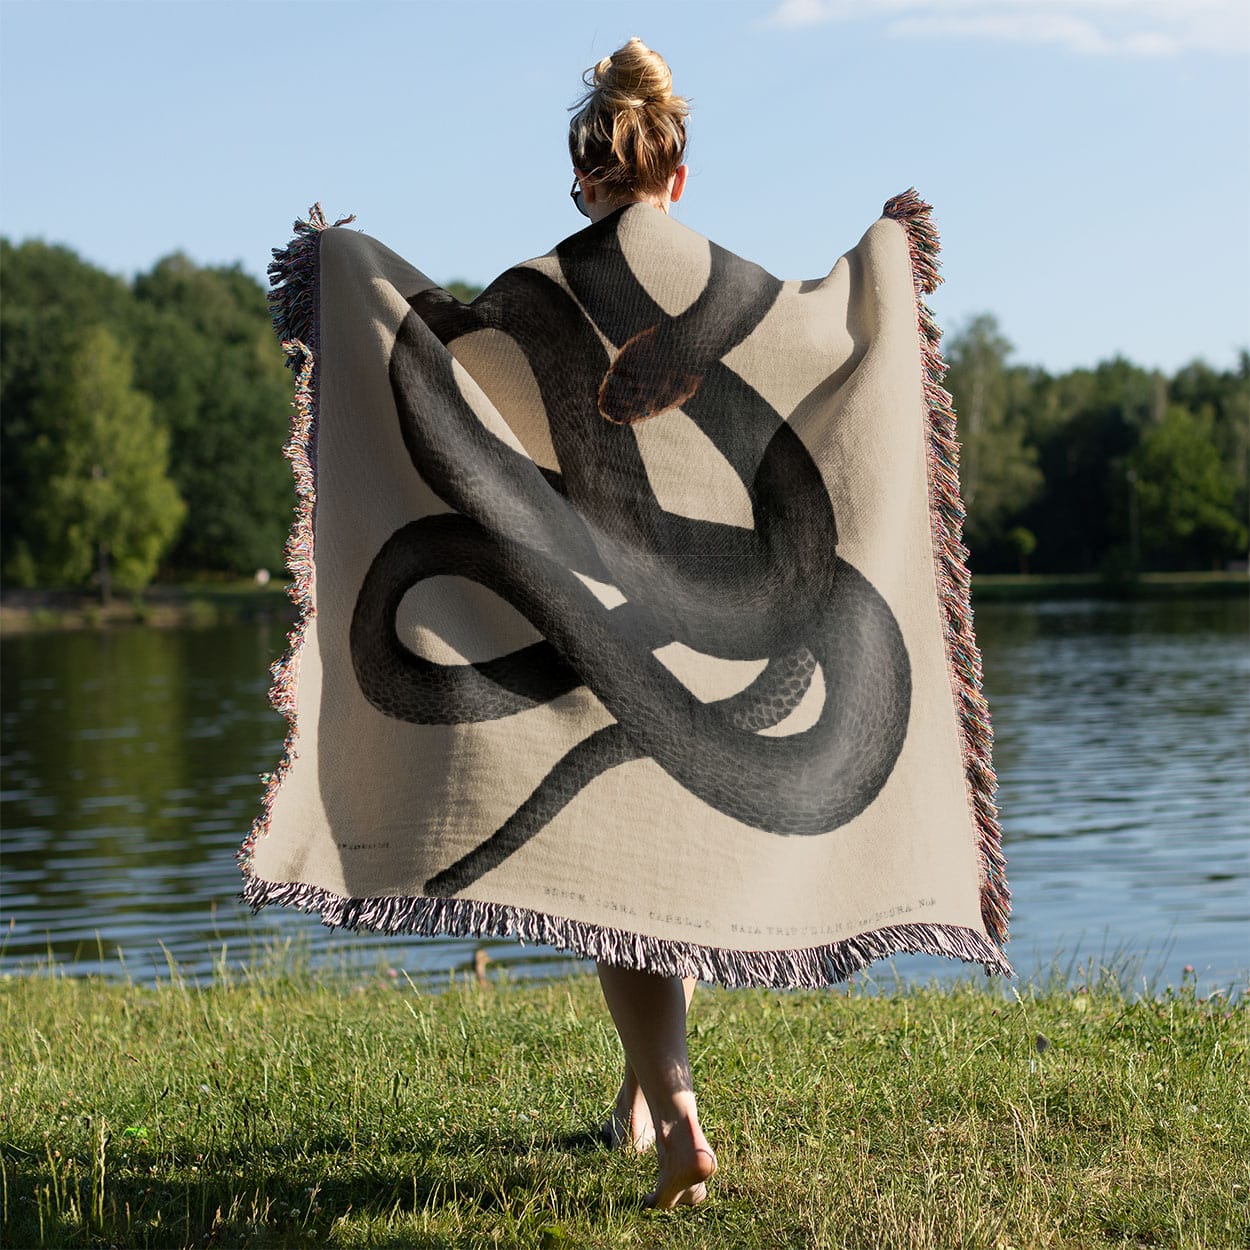 Cool Snake Woven Blanket Held on a Woman's Back Outside